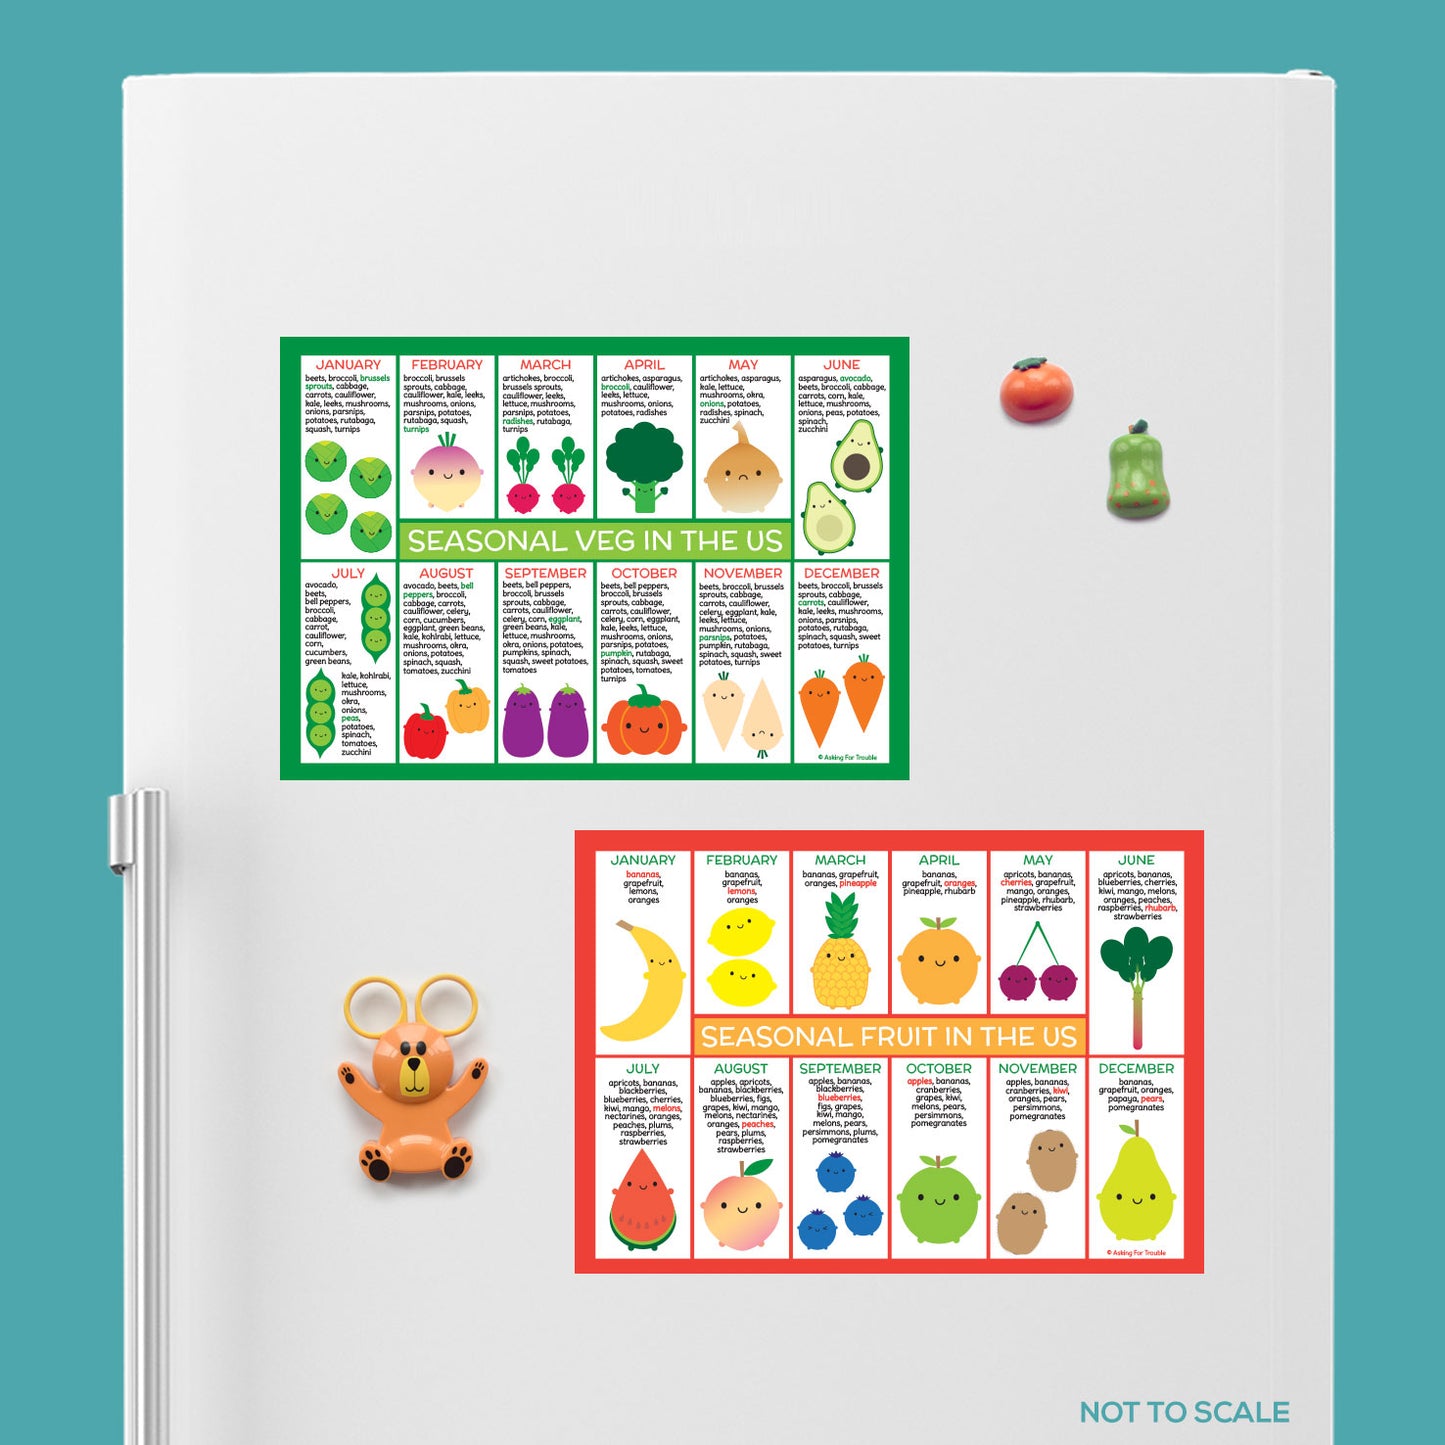 Kawaii Illustrated seasonal fruit and vegetables charts for the USA displayed on a fridge door (not to scale)